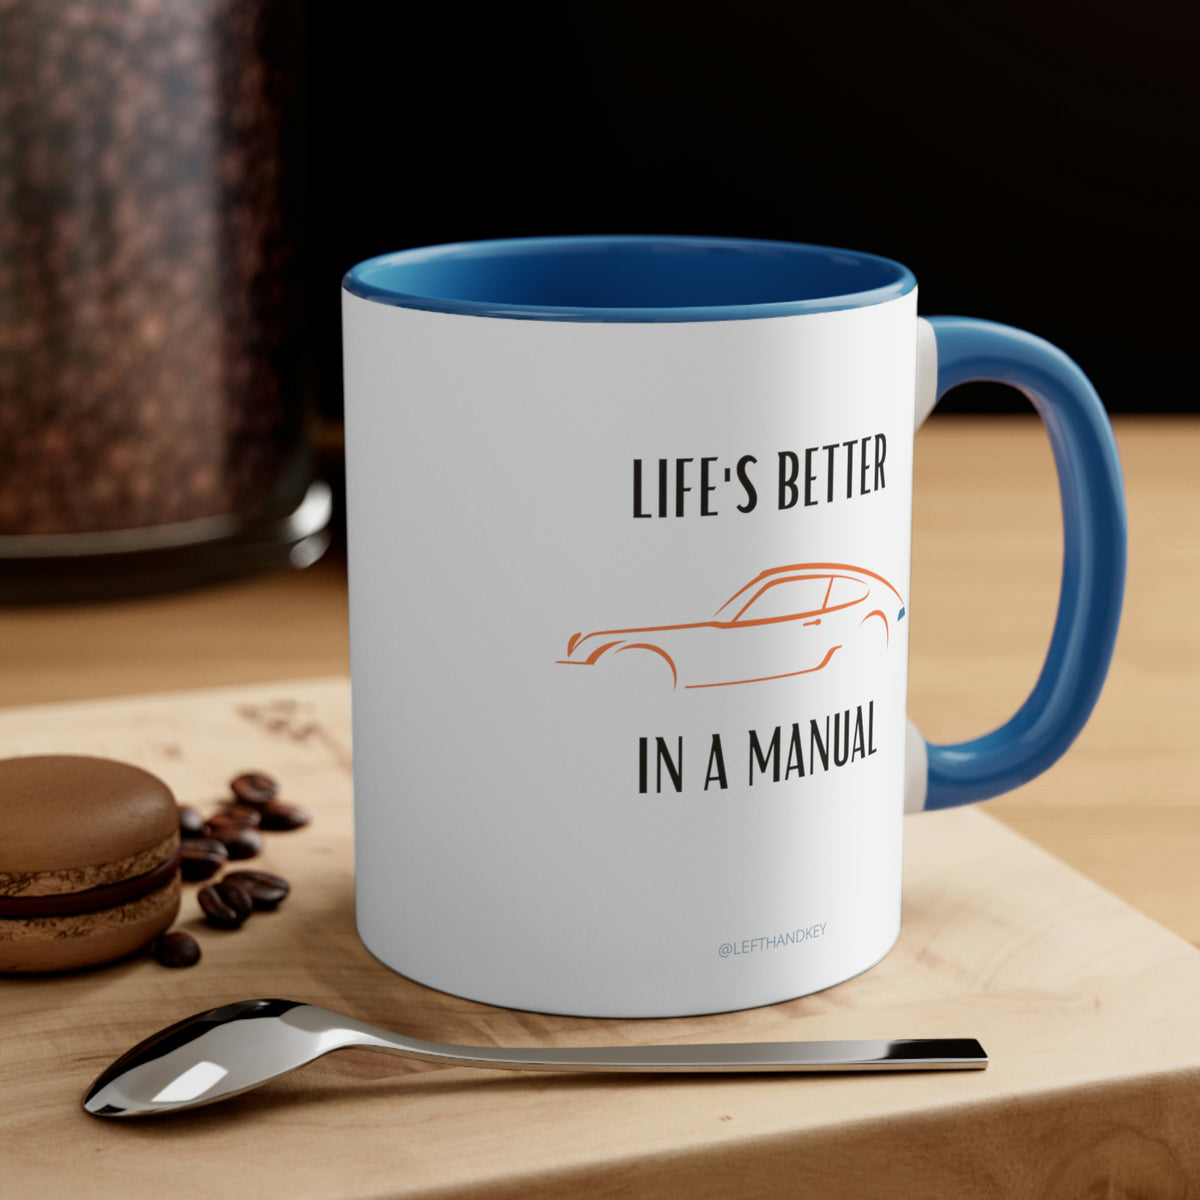 Double-Sided Coffee Mug - Life Is Better - Furesque